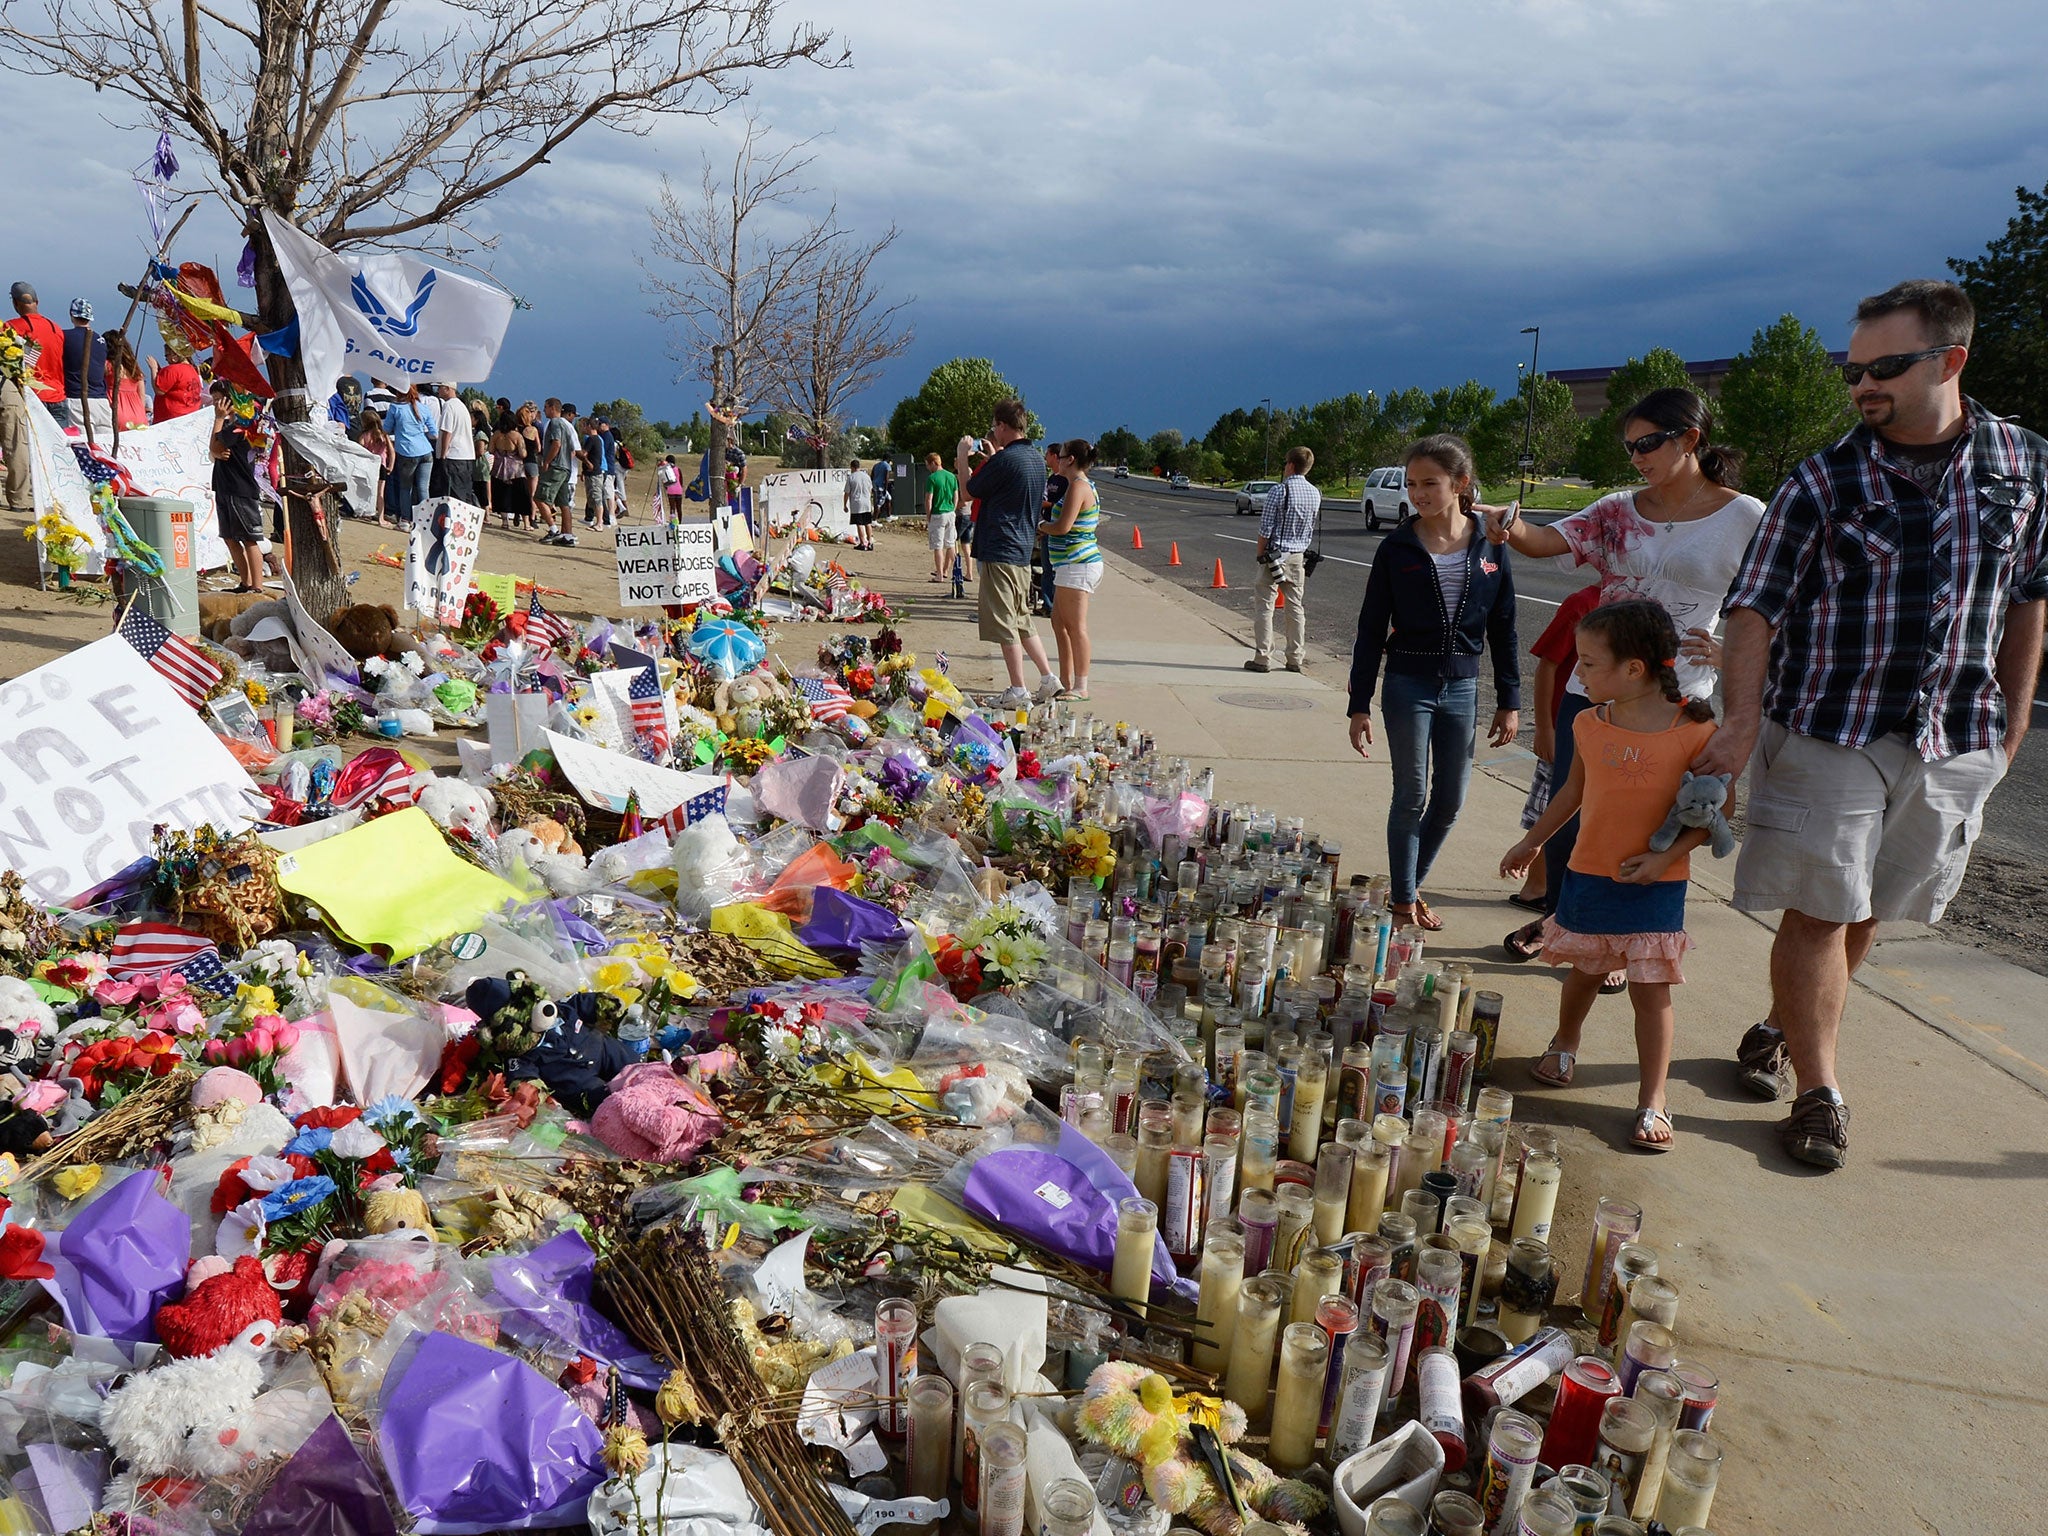 People continue visit the roadside memorial set up for victims of the Colorado theater shooting massacre (Image: Getty)